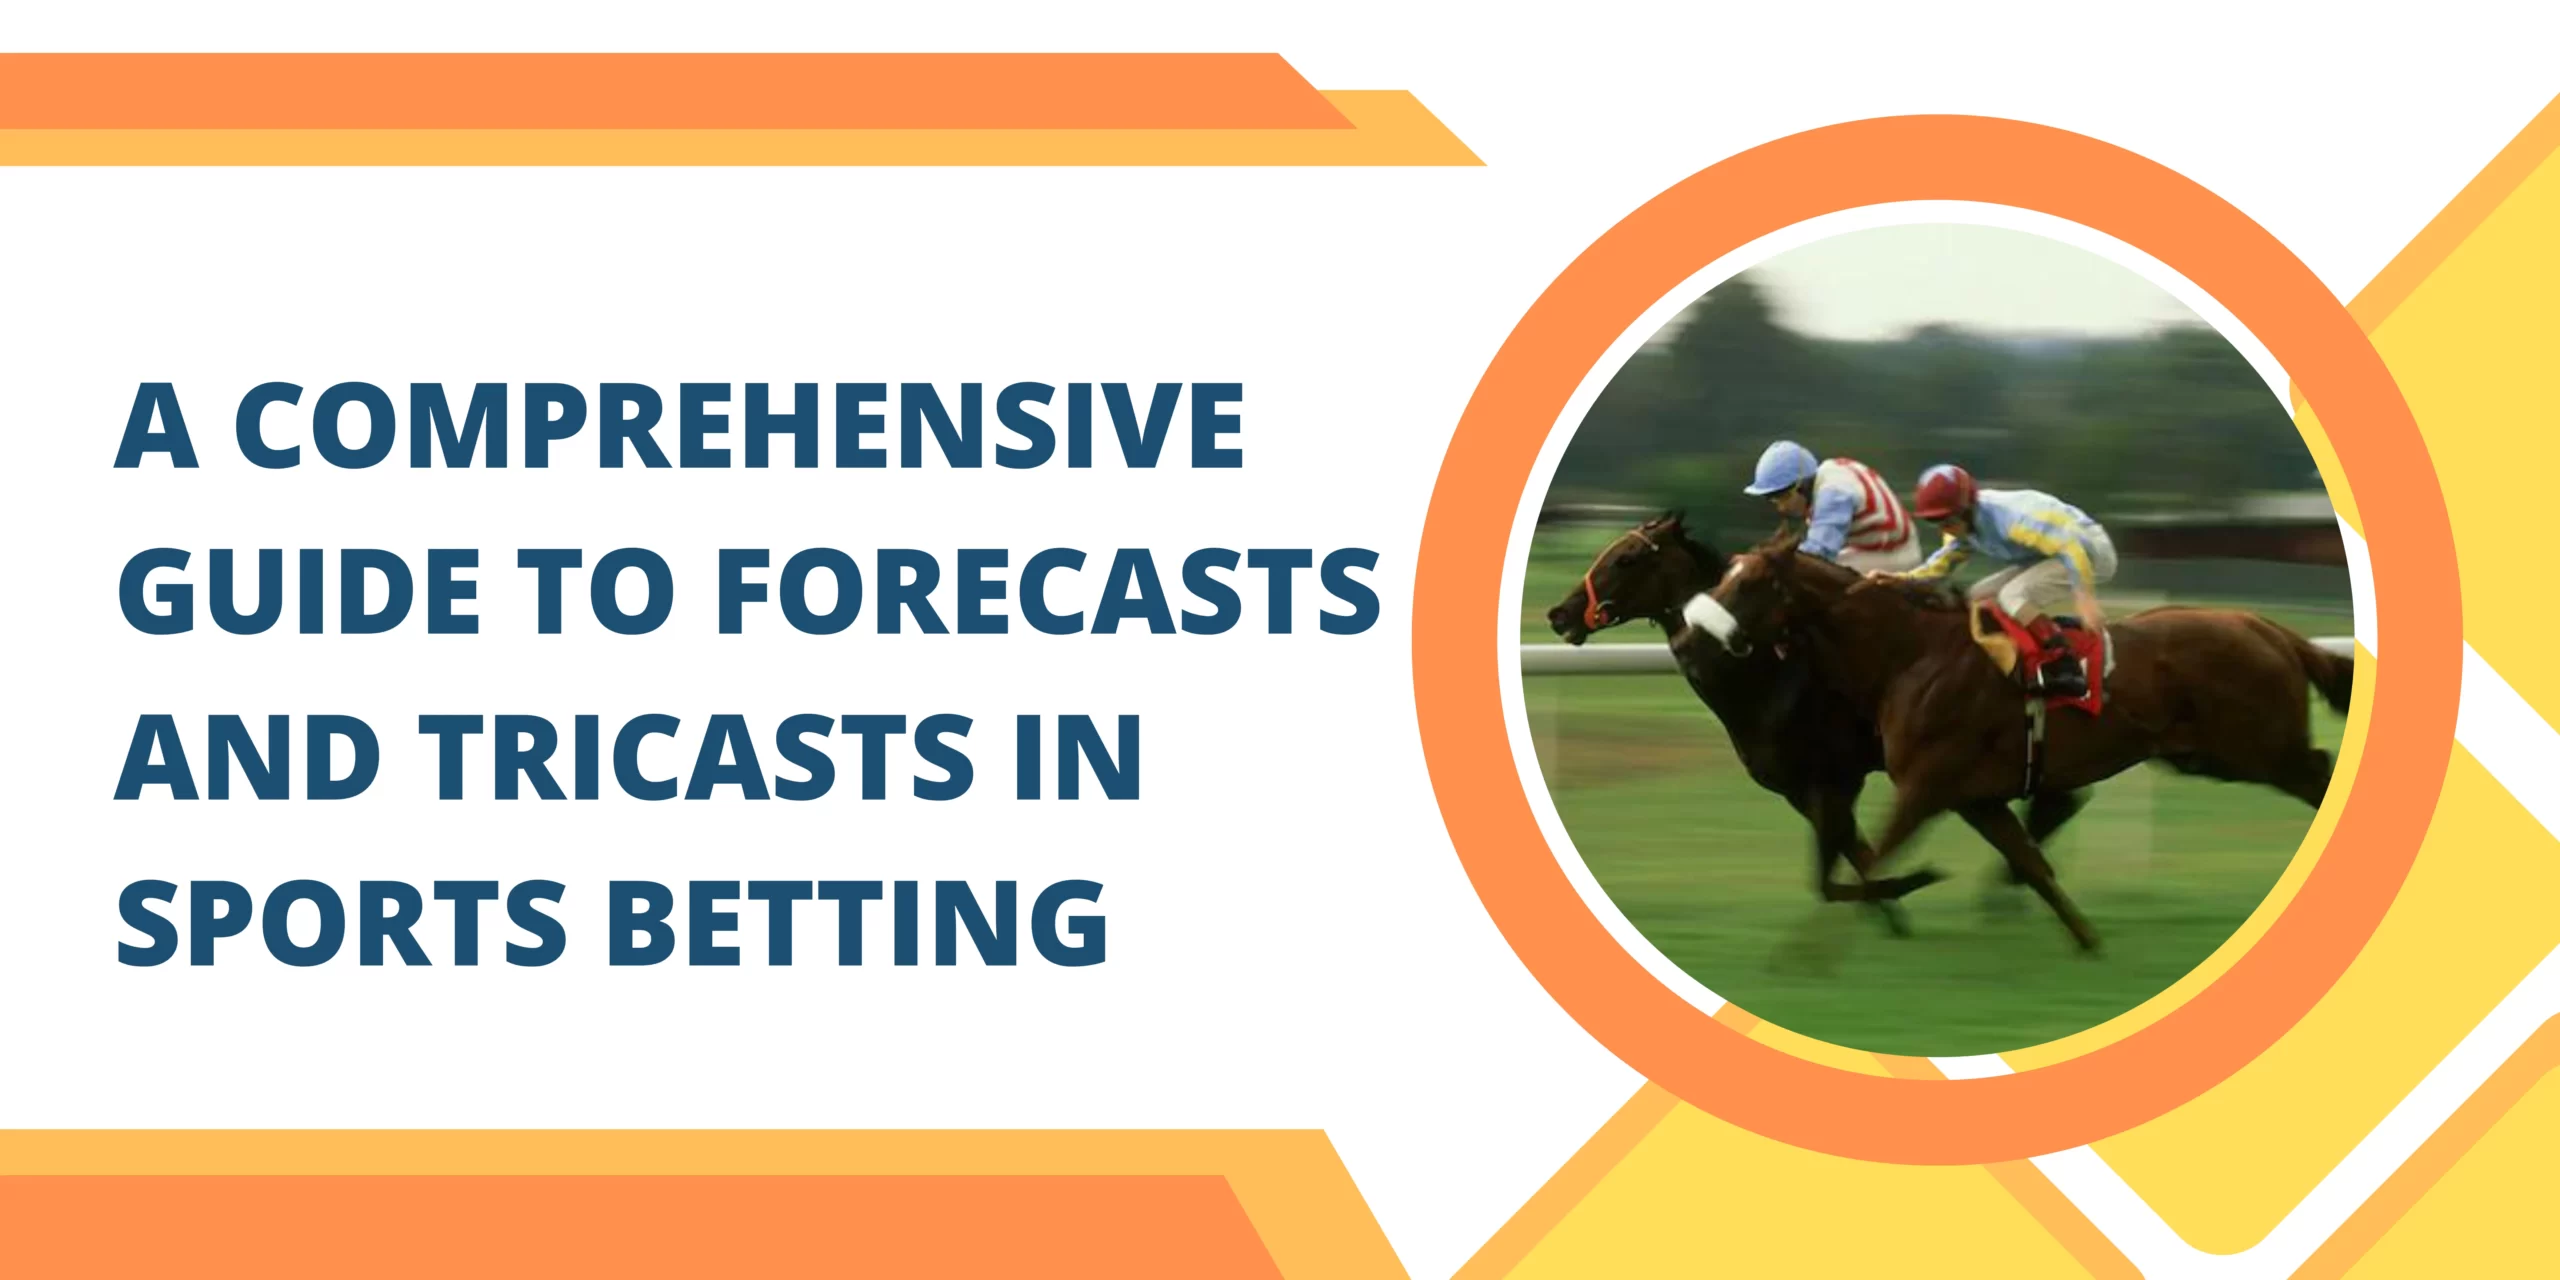 A Comprehensive Guide to Forecasts and Tricasts in Sports Betting